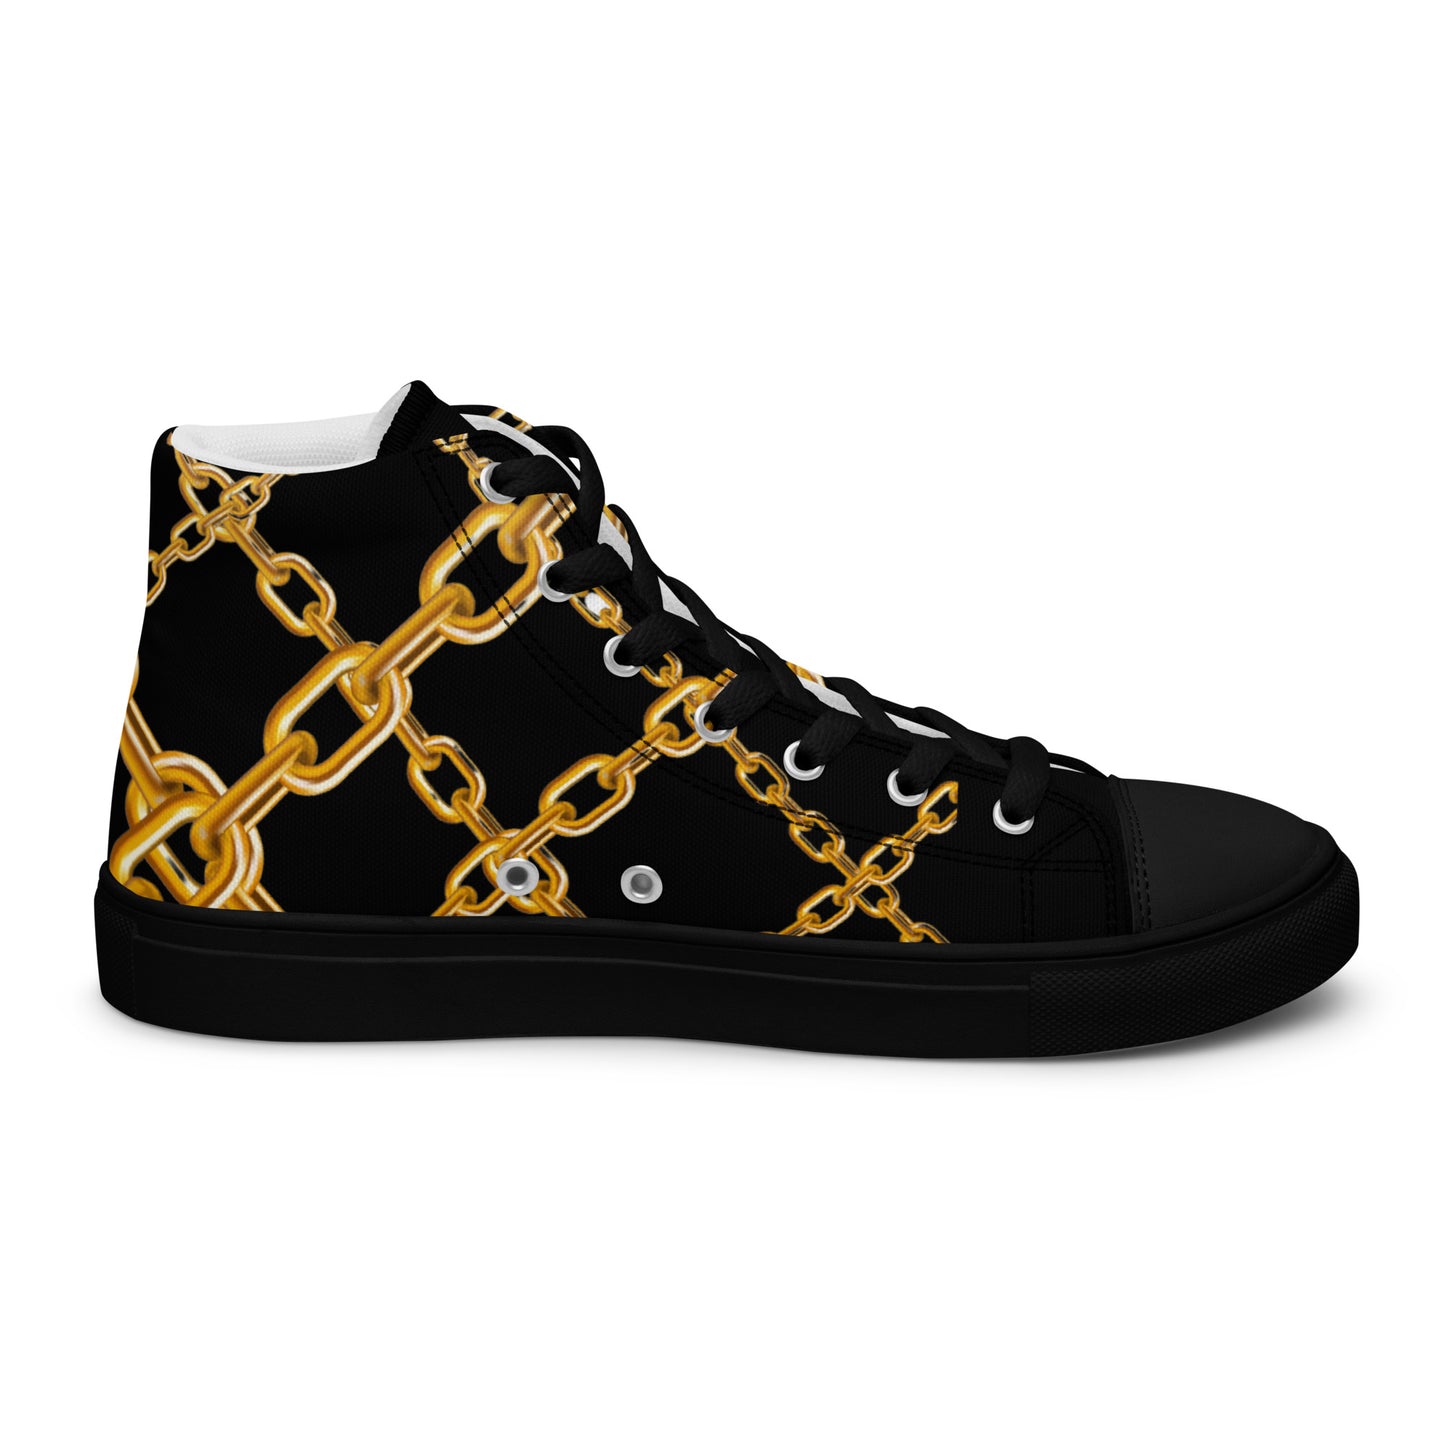 Steampunk Elegance: Black & Gold High Top Sneakers for Men - Unique Streetwear, Designer Canvas, Luxury Festival Footwear with Stylish Art Deco Chain Links